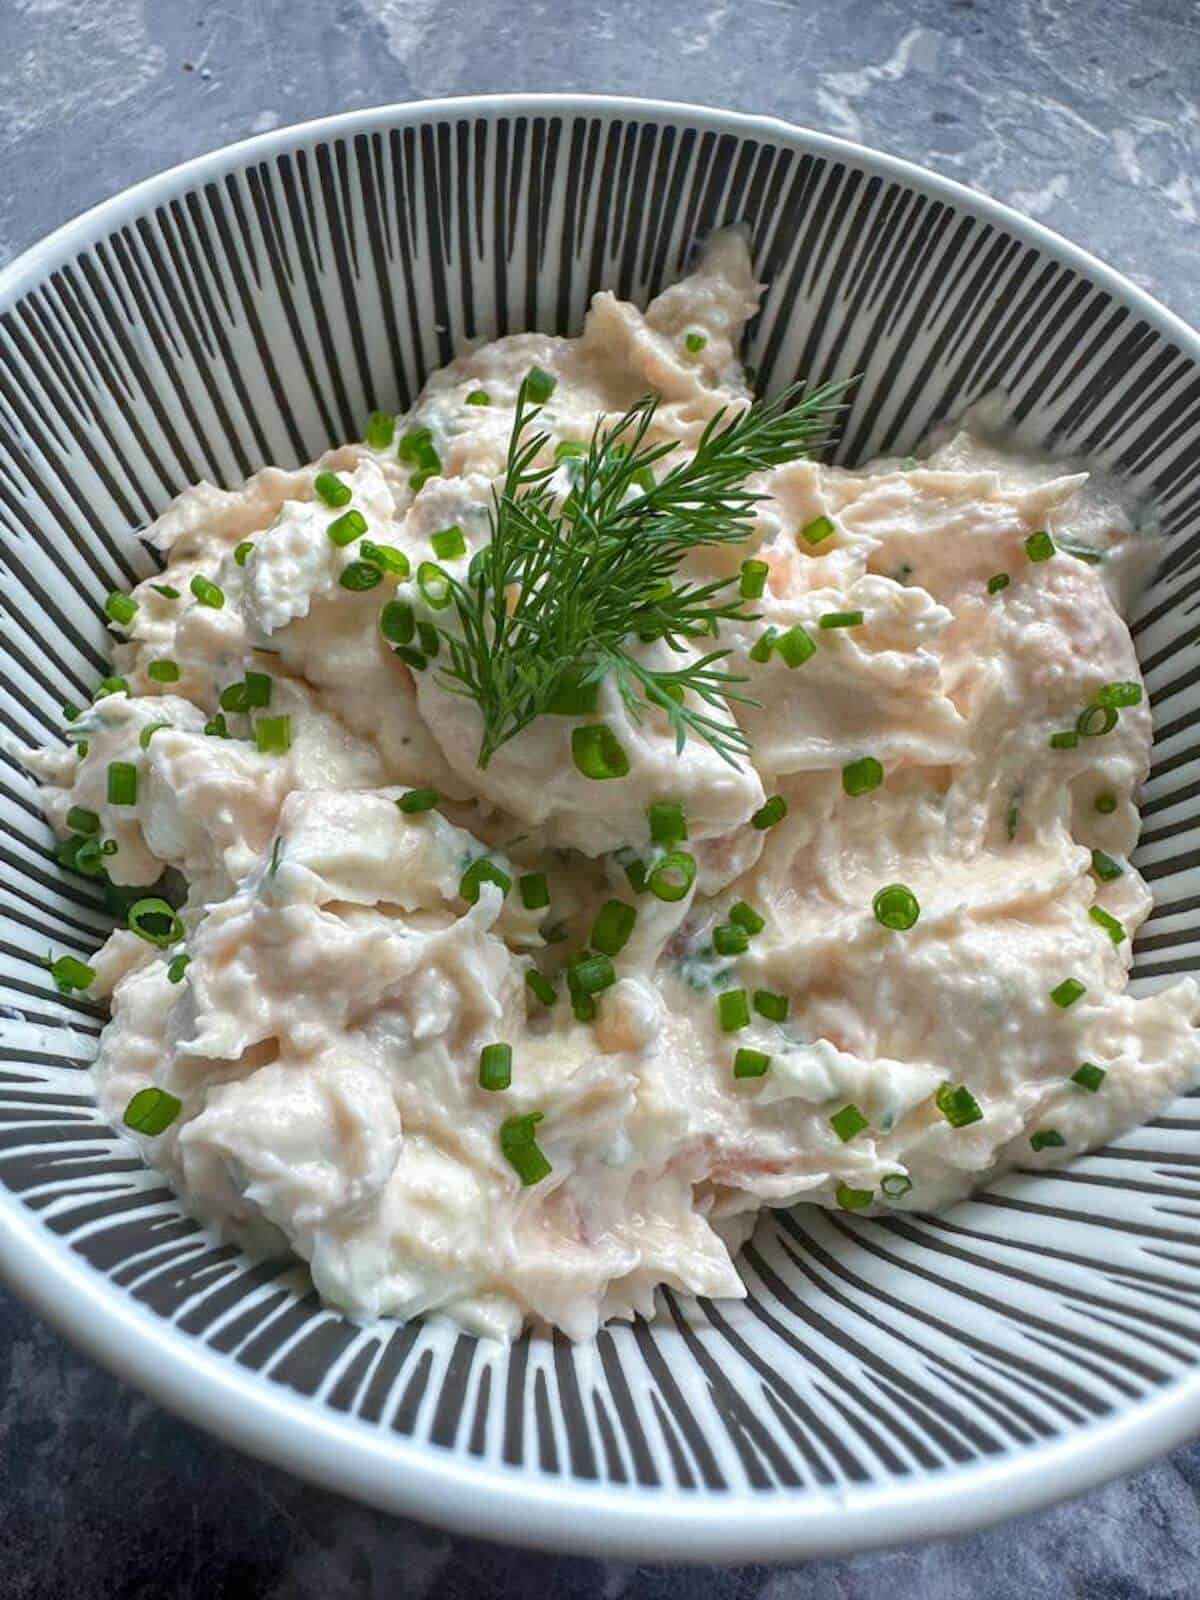 A close up of smoked salmon dip in a serving bowl garnished with fresh chives and dill.